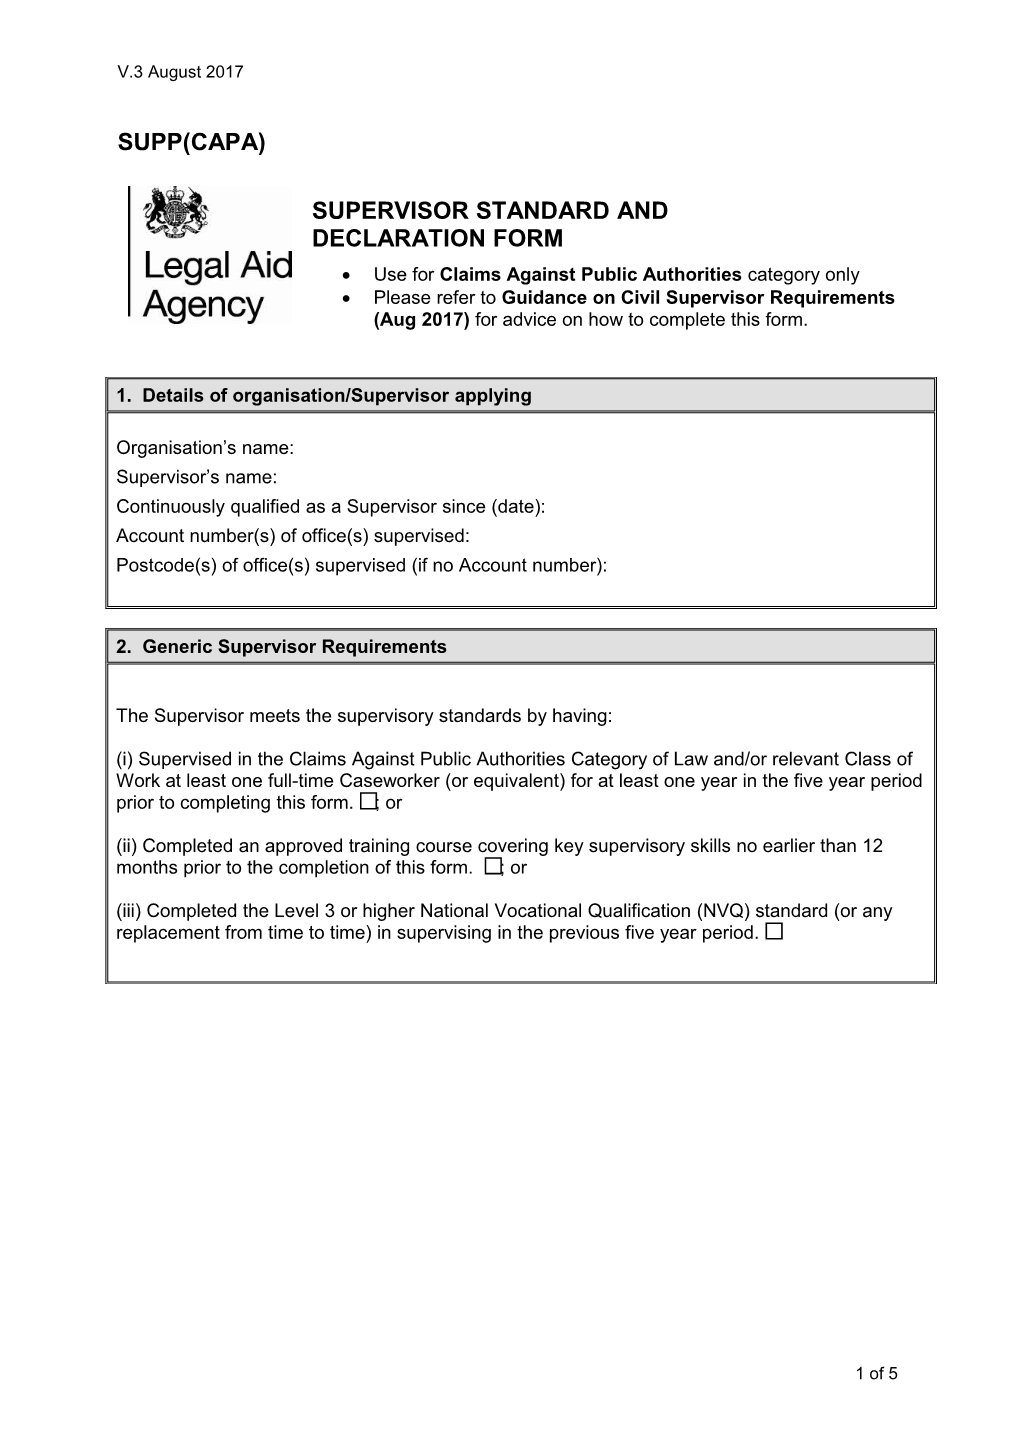 Actions Against the Police Etc. Supervisor Declaration Form